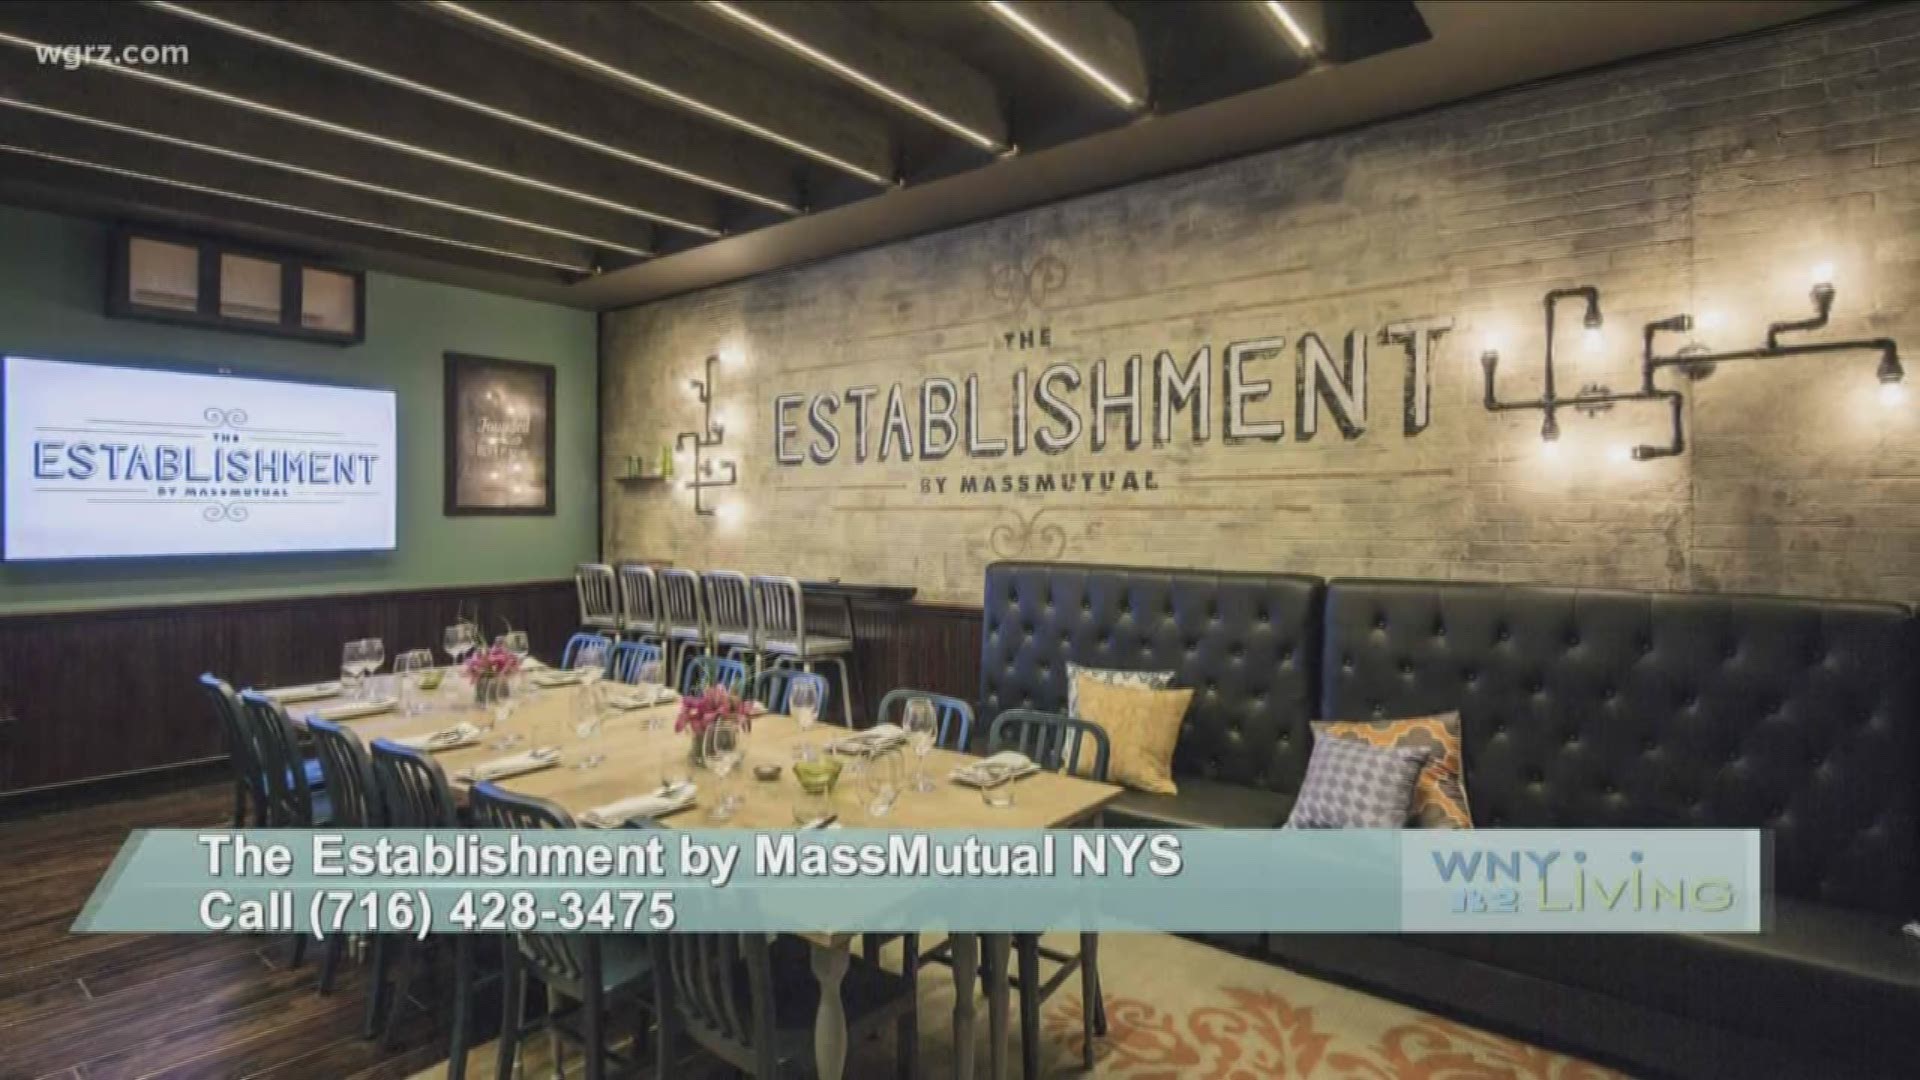 WNY Living - August 3 - The Establishment by MassMutual (SPONSORED CONTENT)